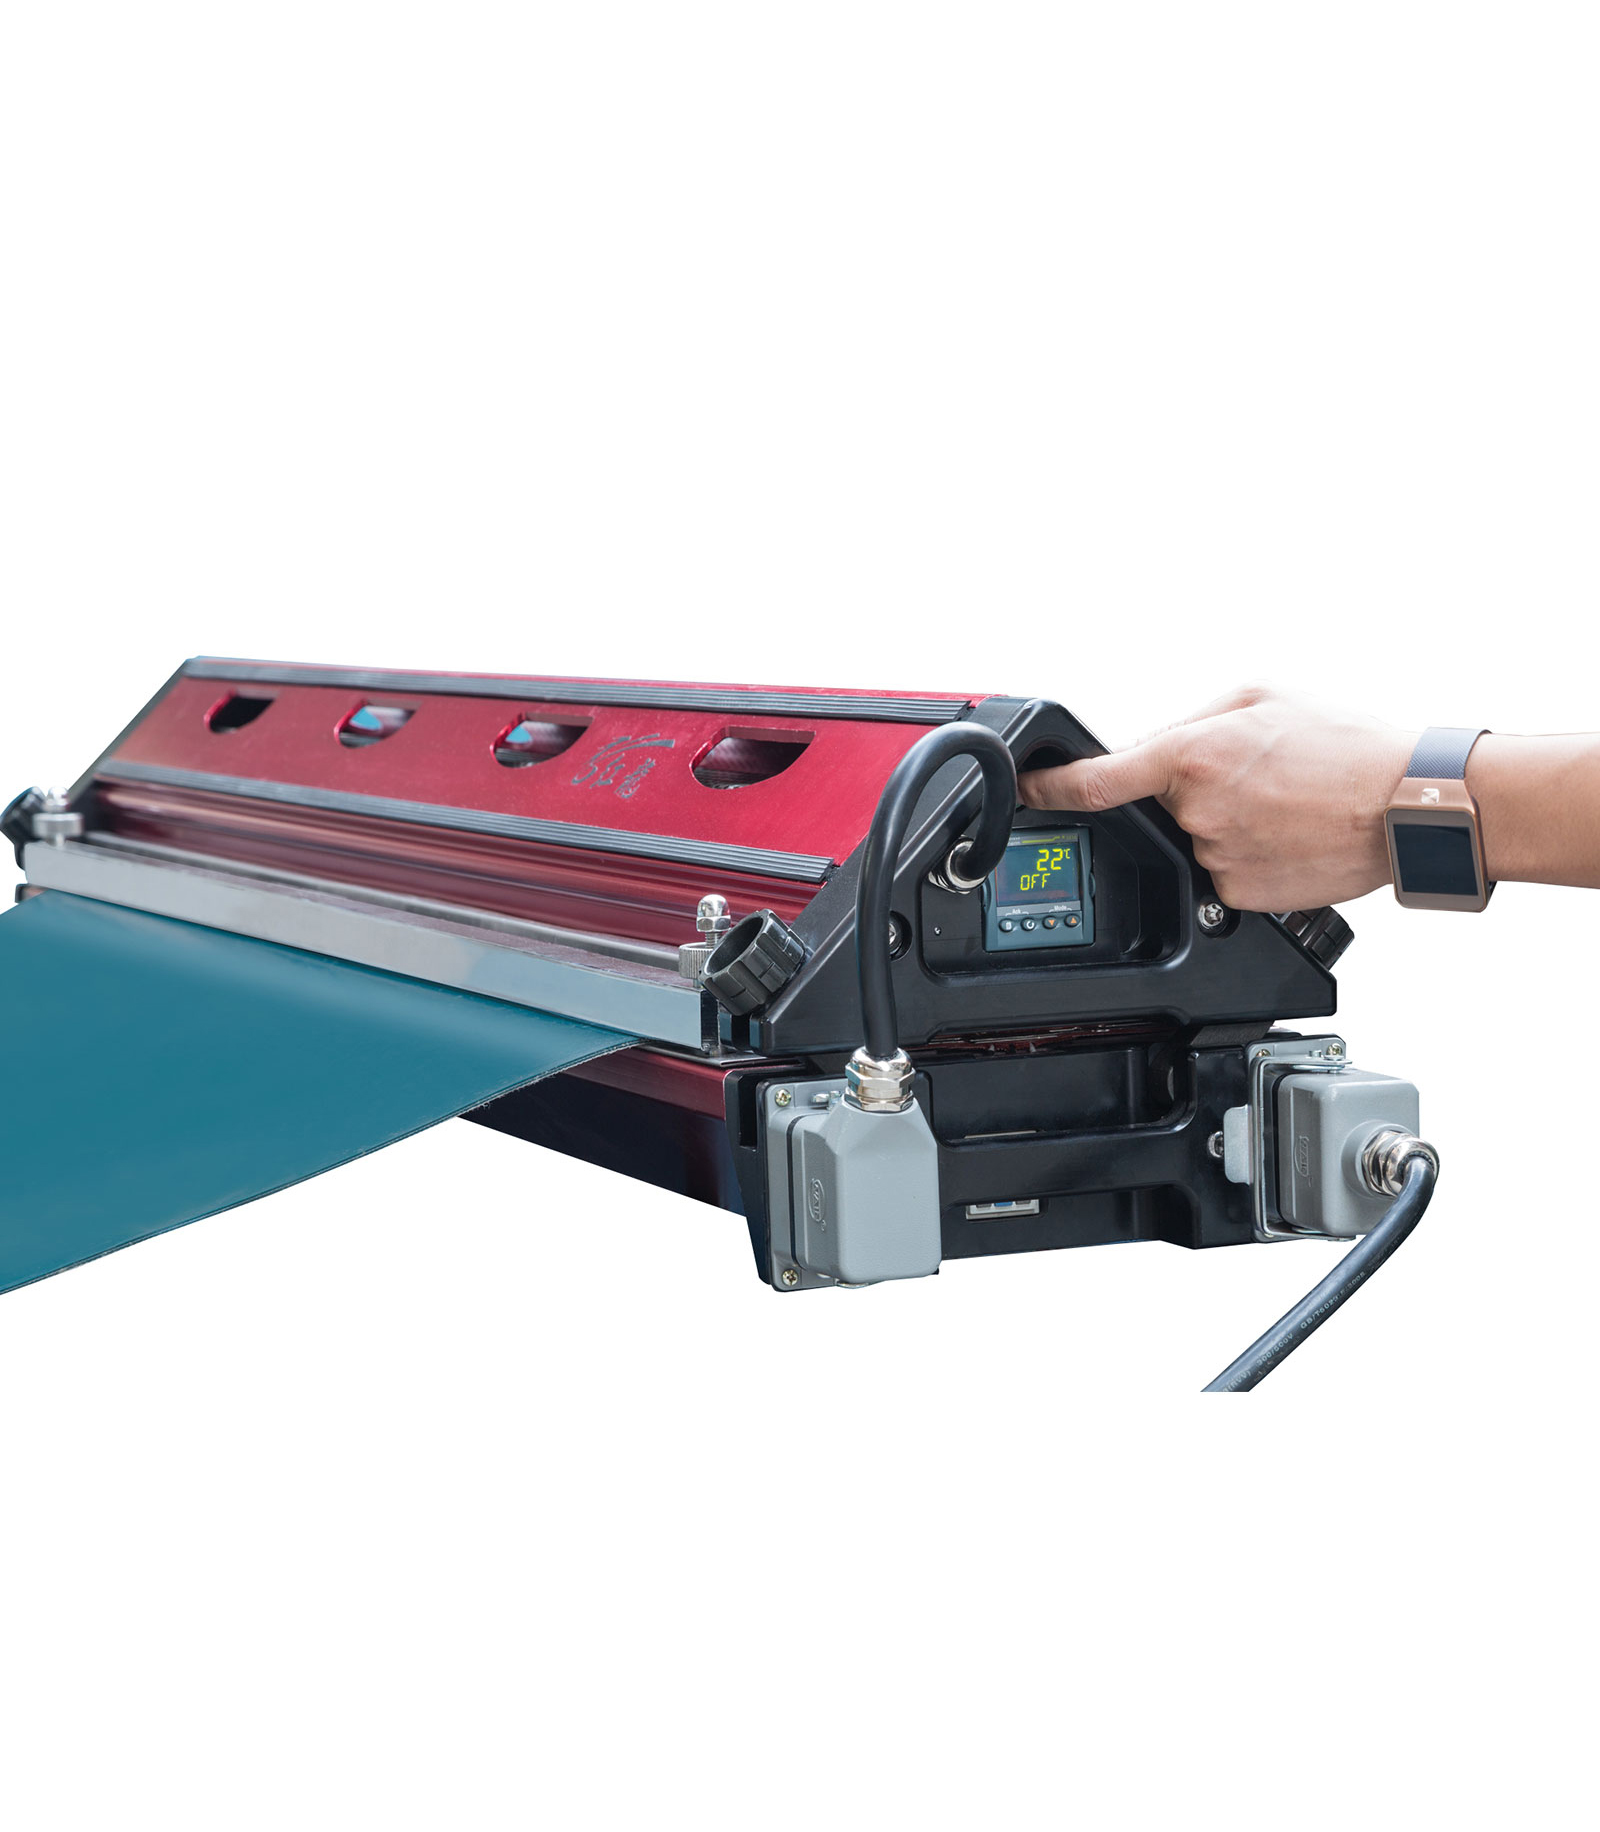 What Should Pay Attention to In The Daily Inspection of Belt Slitting Machine?